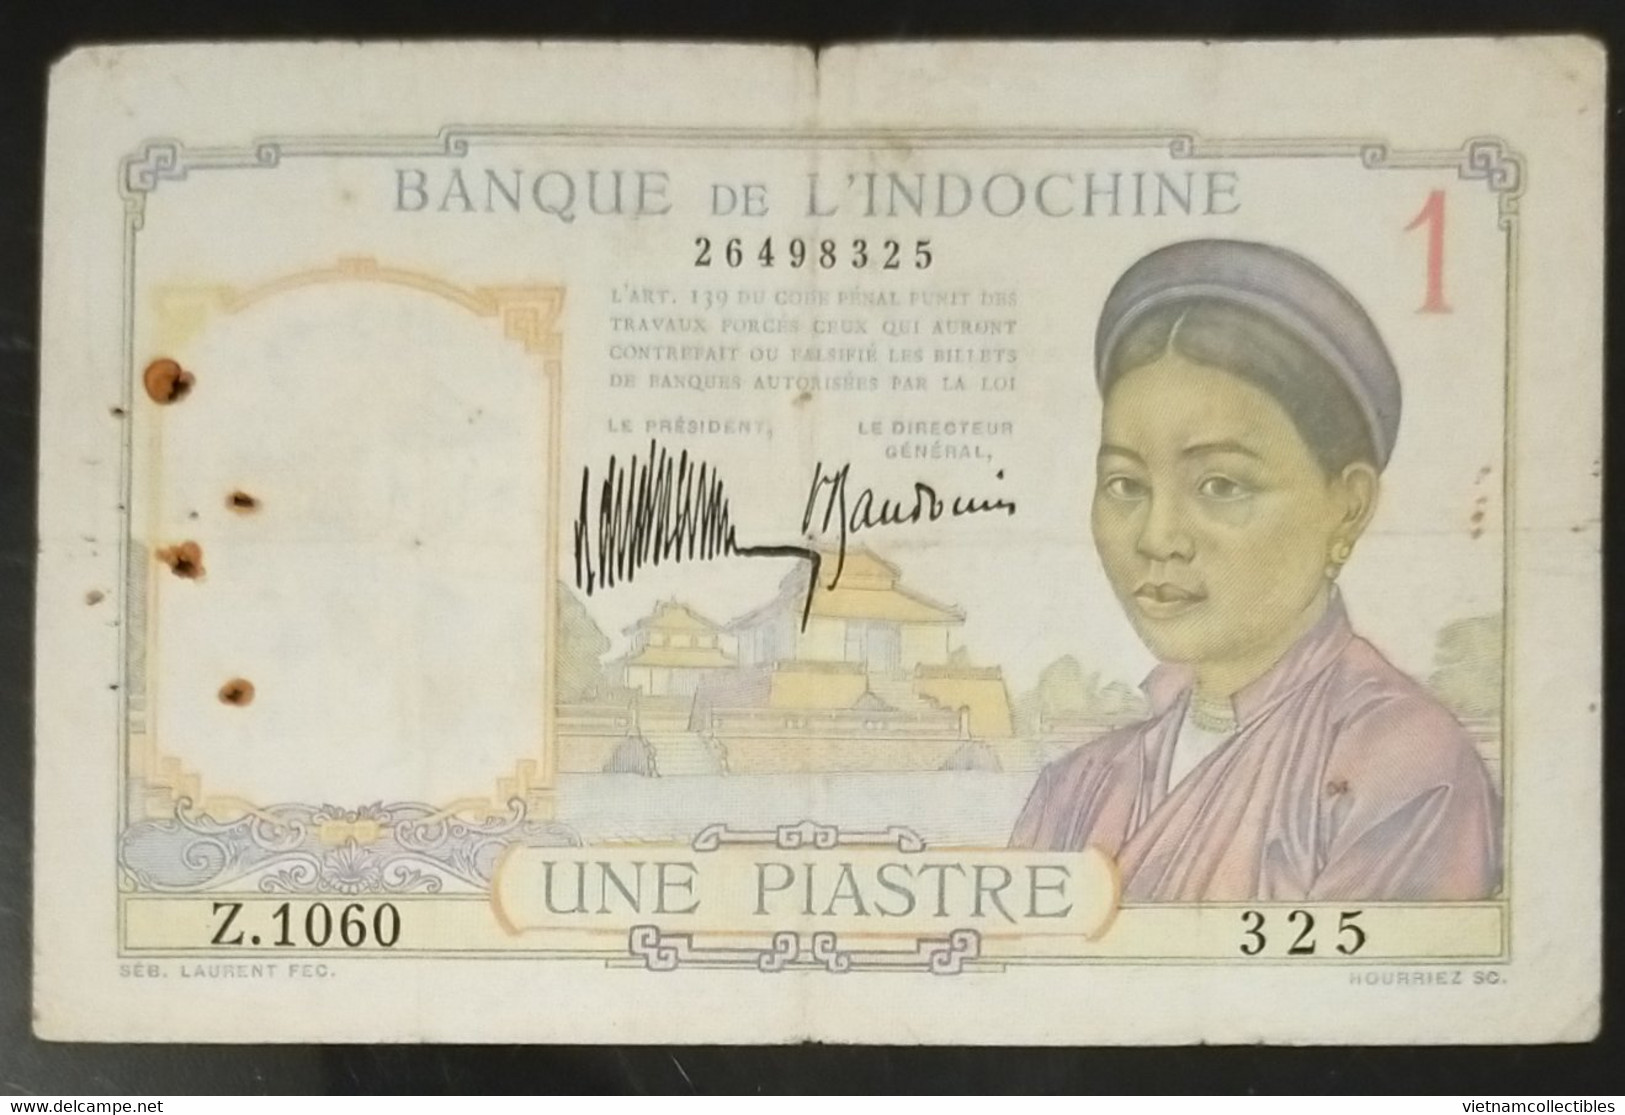 French Indochina Indo China Indochine Vietnam Cambodia 1 Piastre VF Banknote Note / Billet - Pick # 54a Laos Text - Indochine